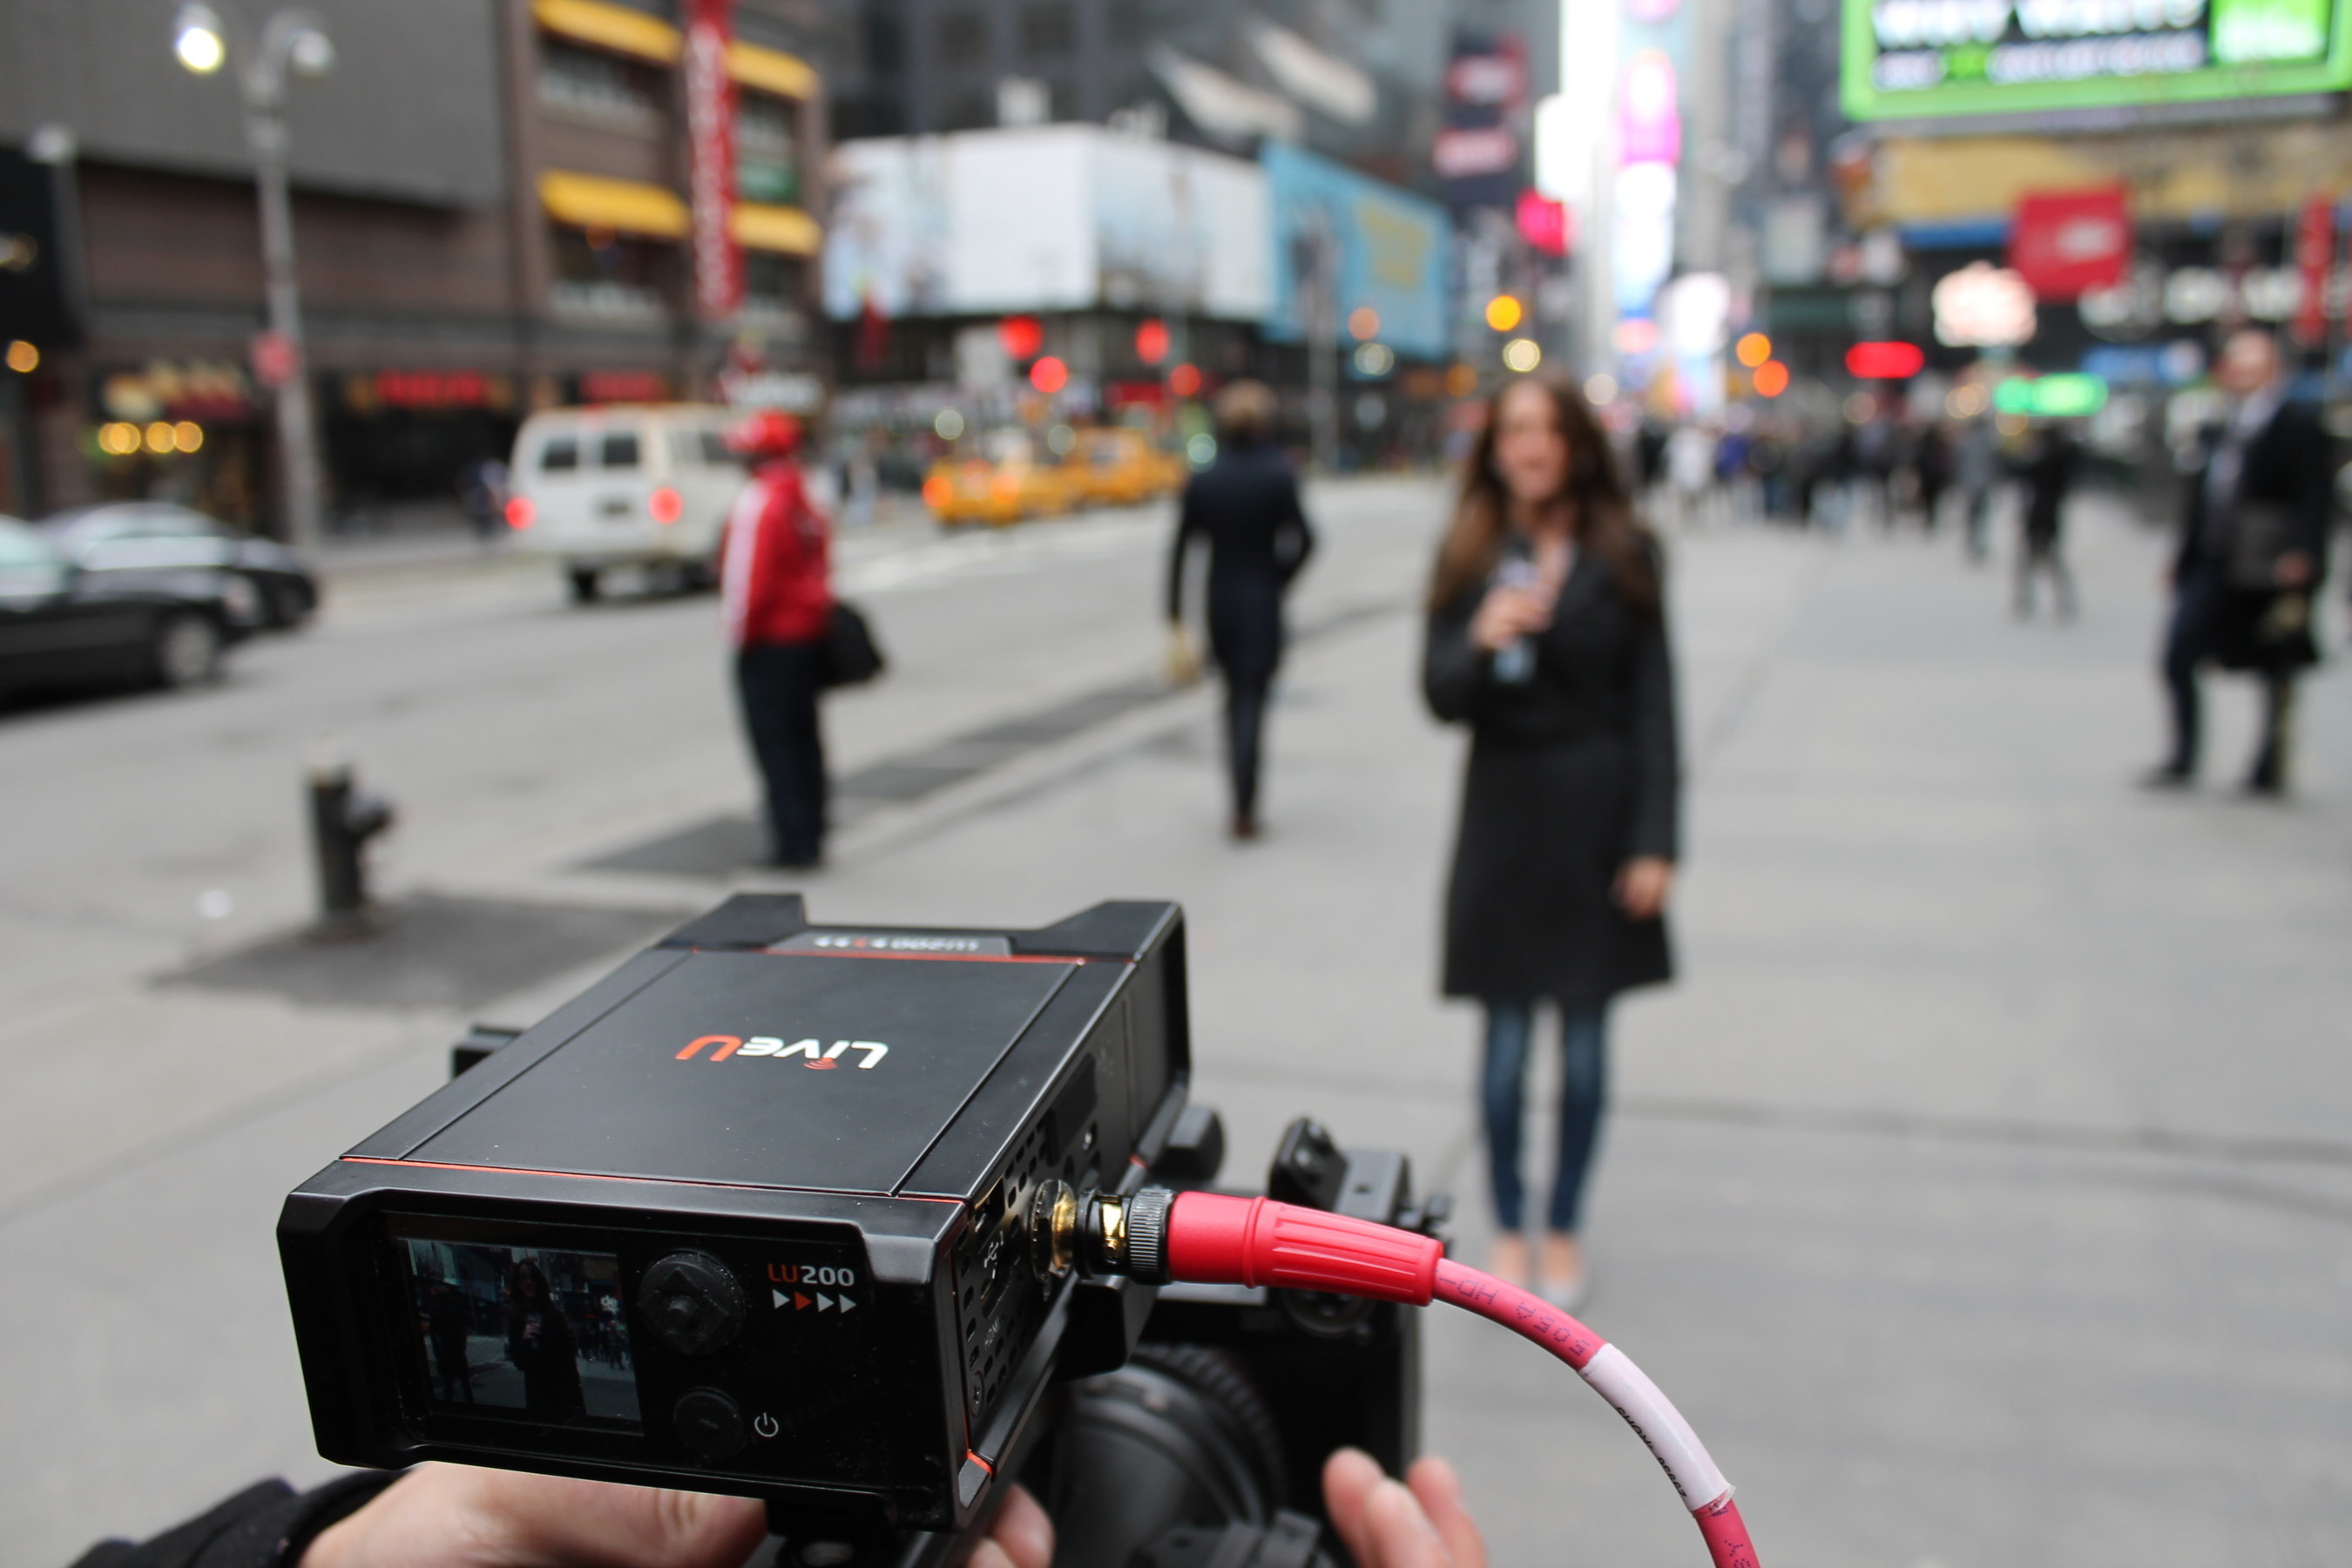 Weighing just 1lb, LiveU's LU200 allows every field camera to be equipped with a bonding uplink unit